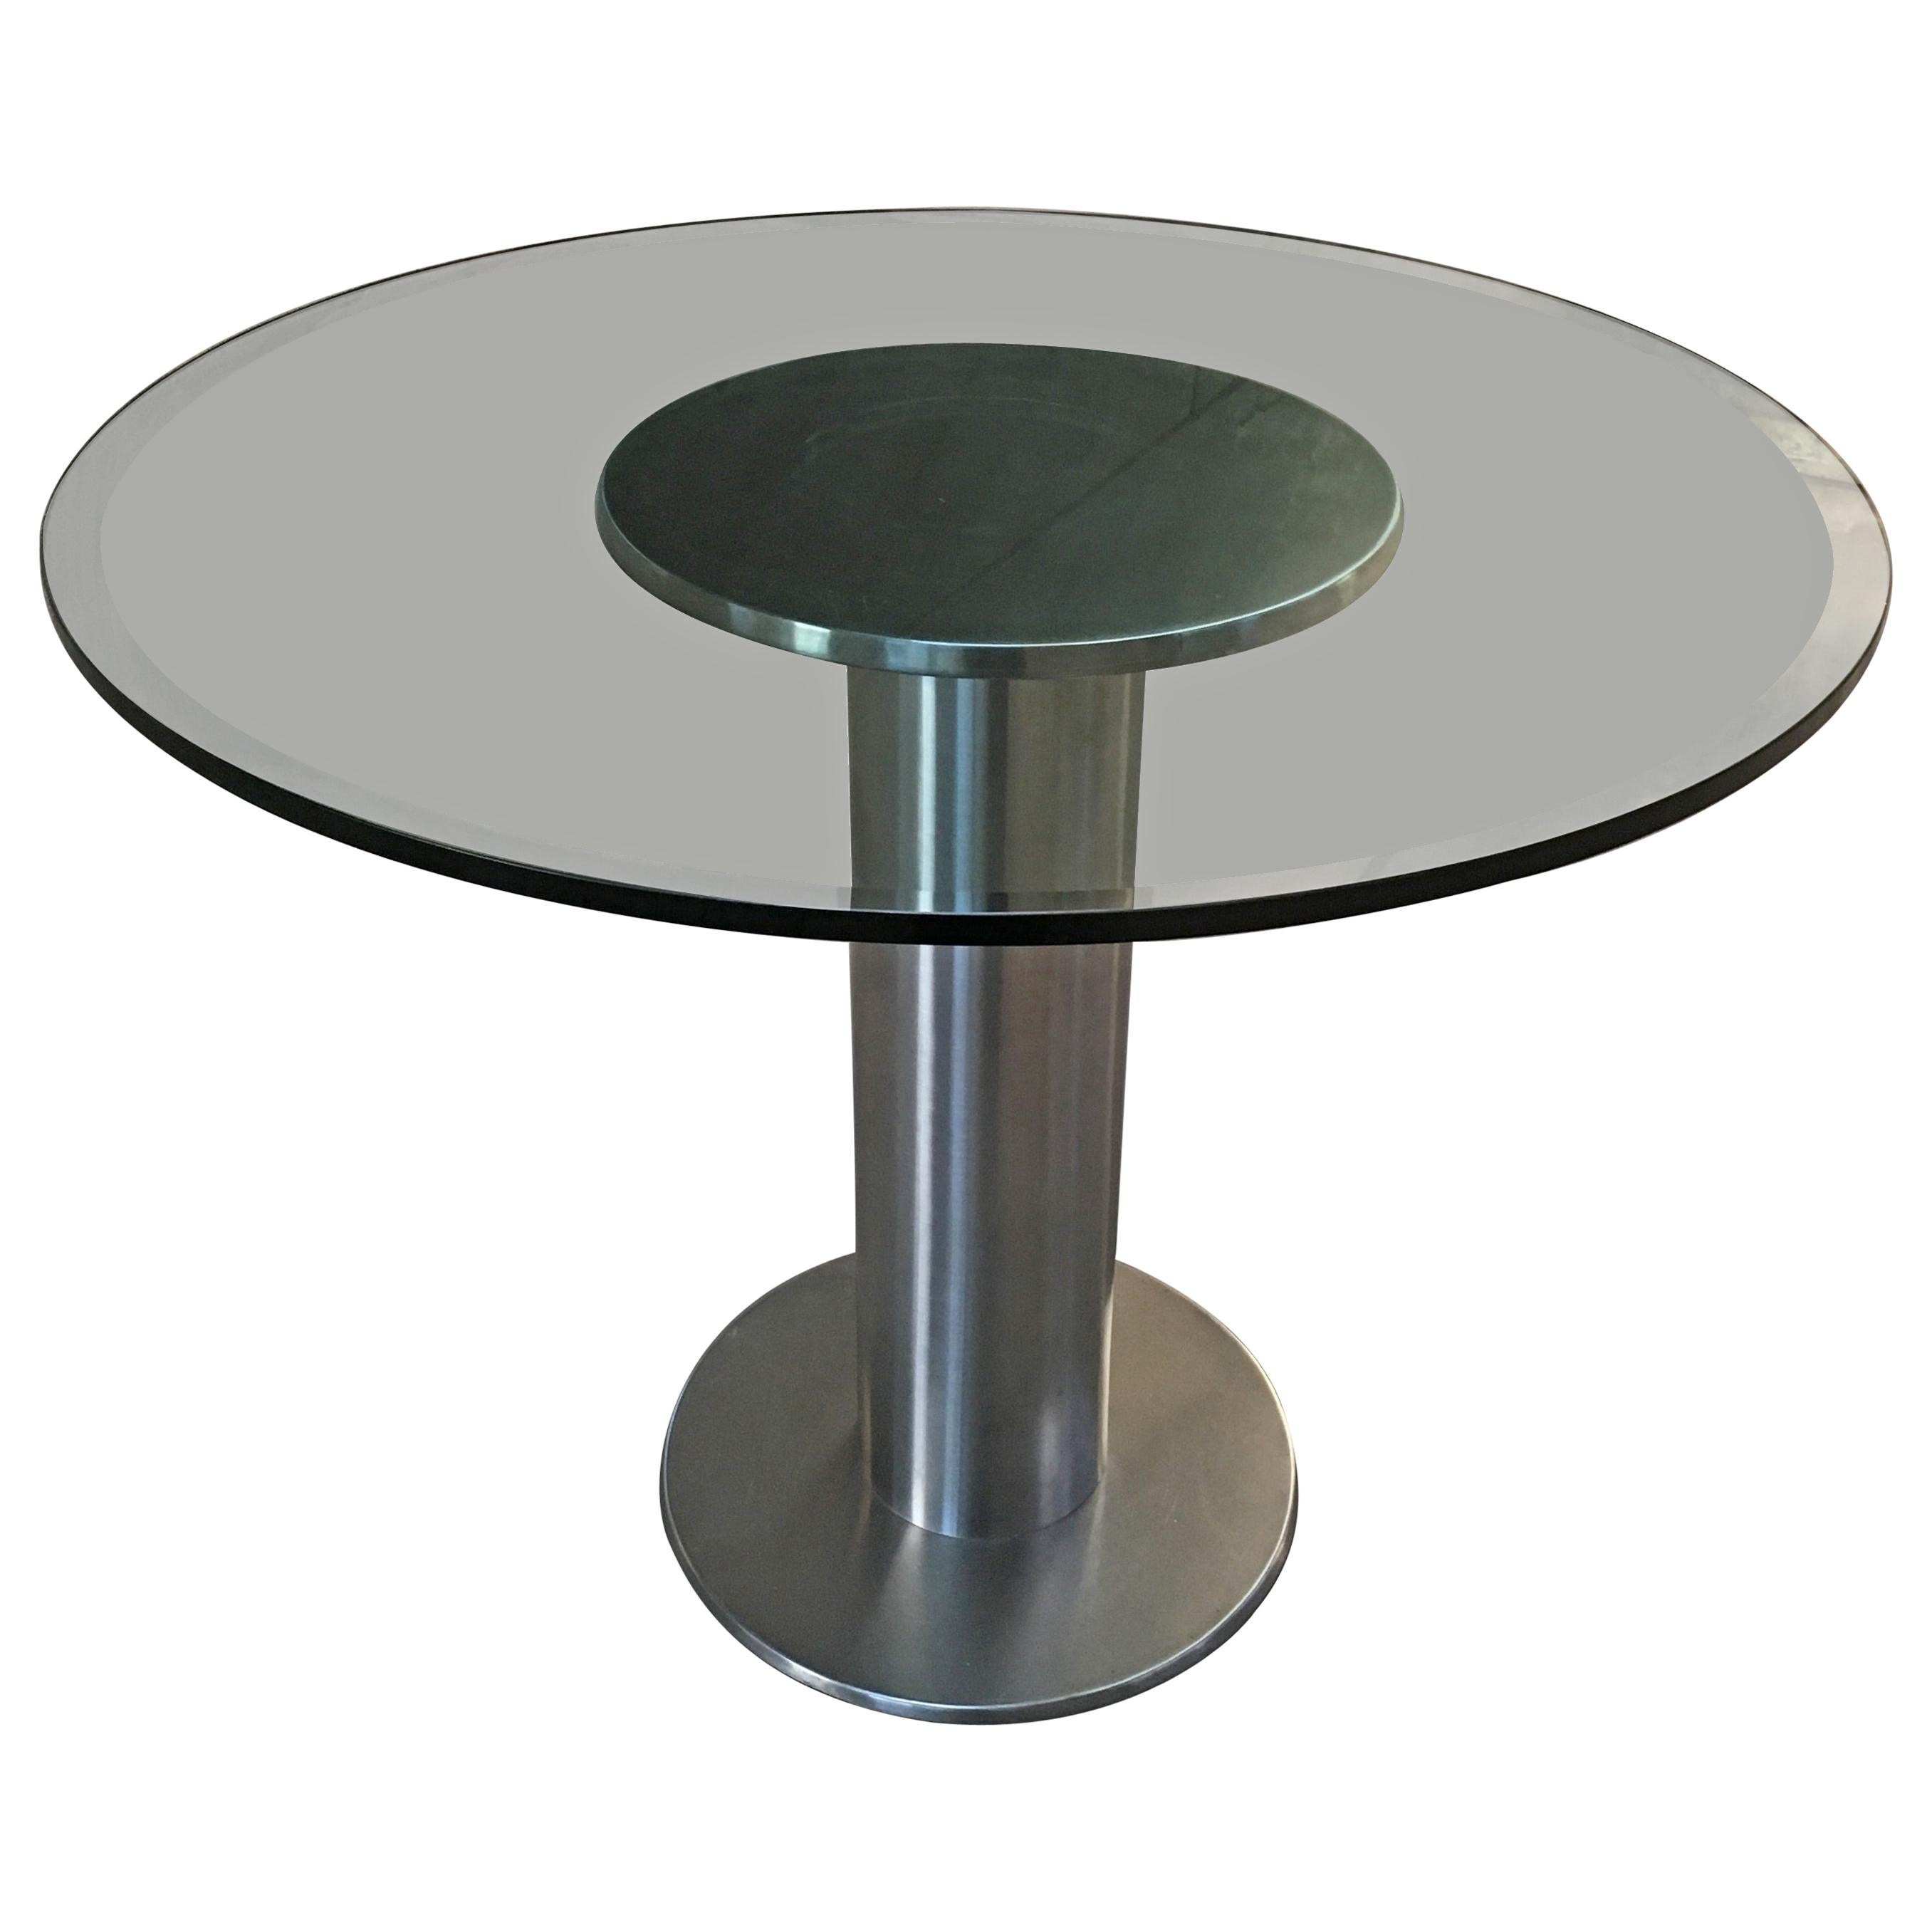 Mid-Century Modern Italian Chrome Dining or Center Table with Glass Top, 1970s